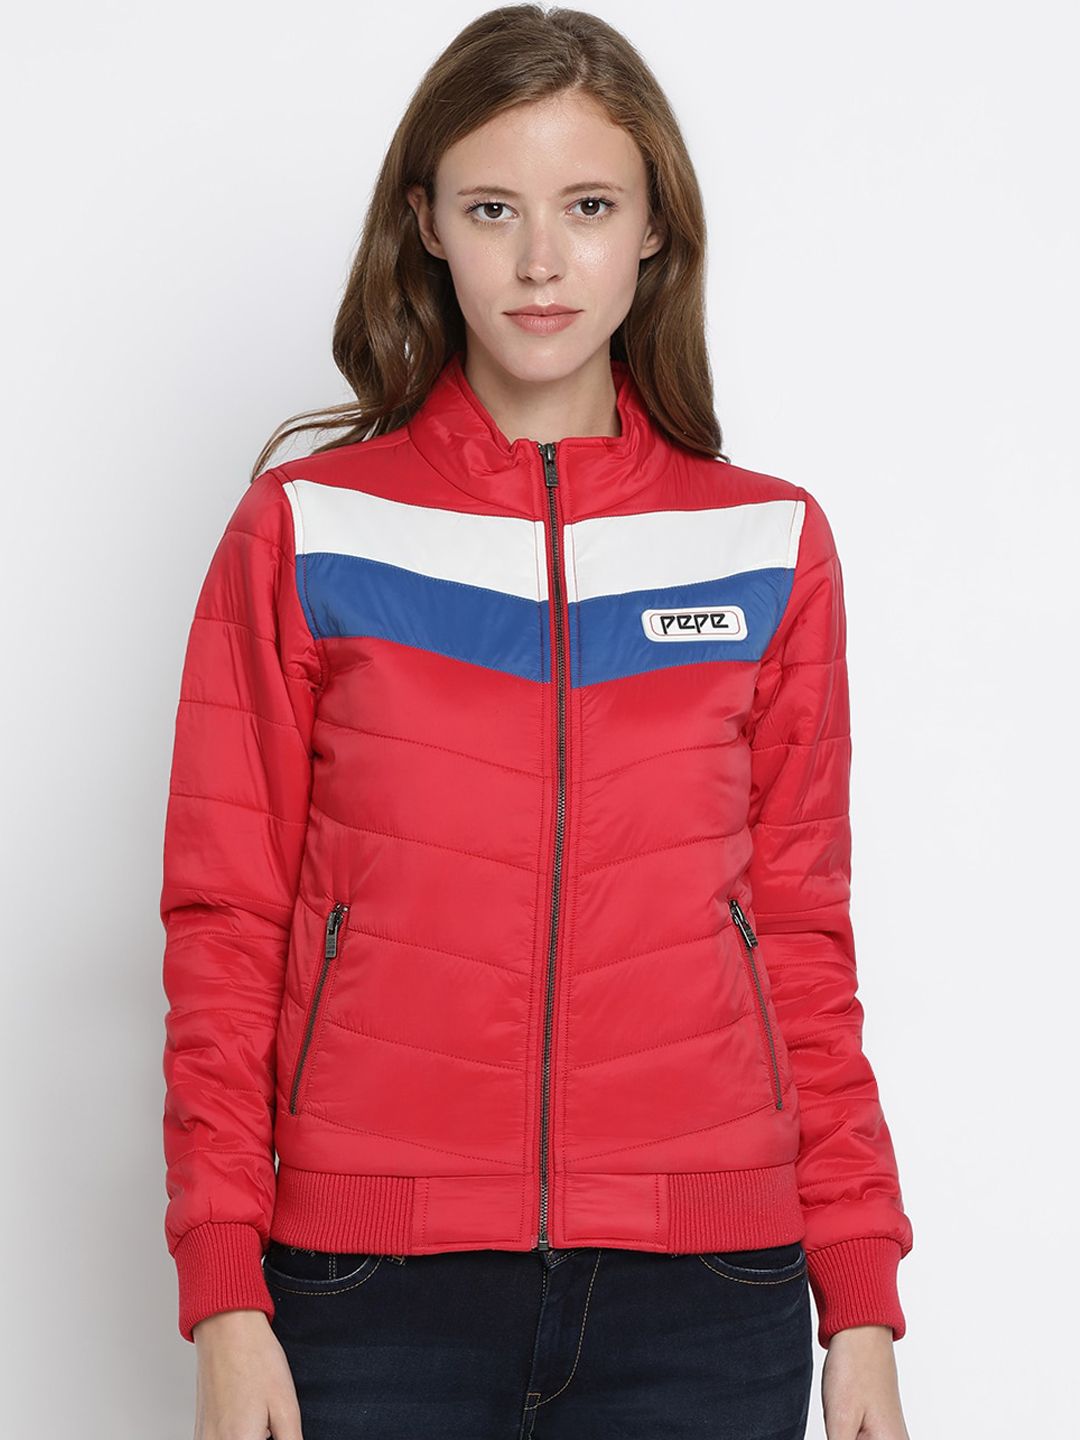 Pepe Jeans Women Red Colourblocked Puffer Jacket Price in India